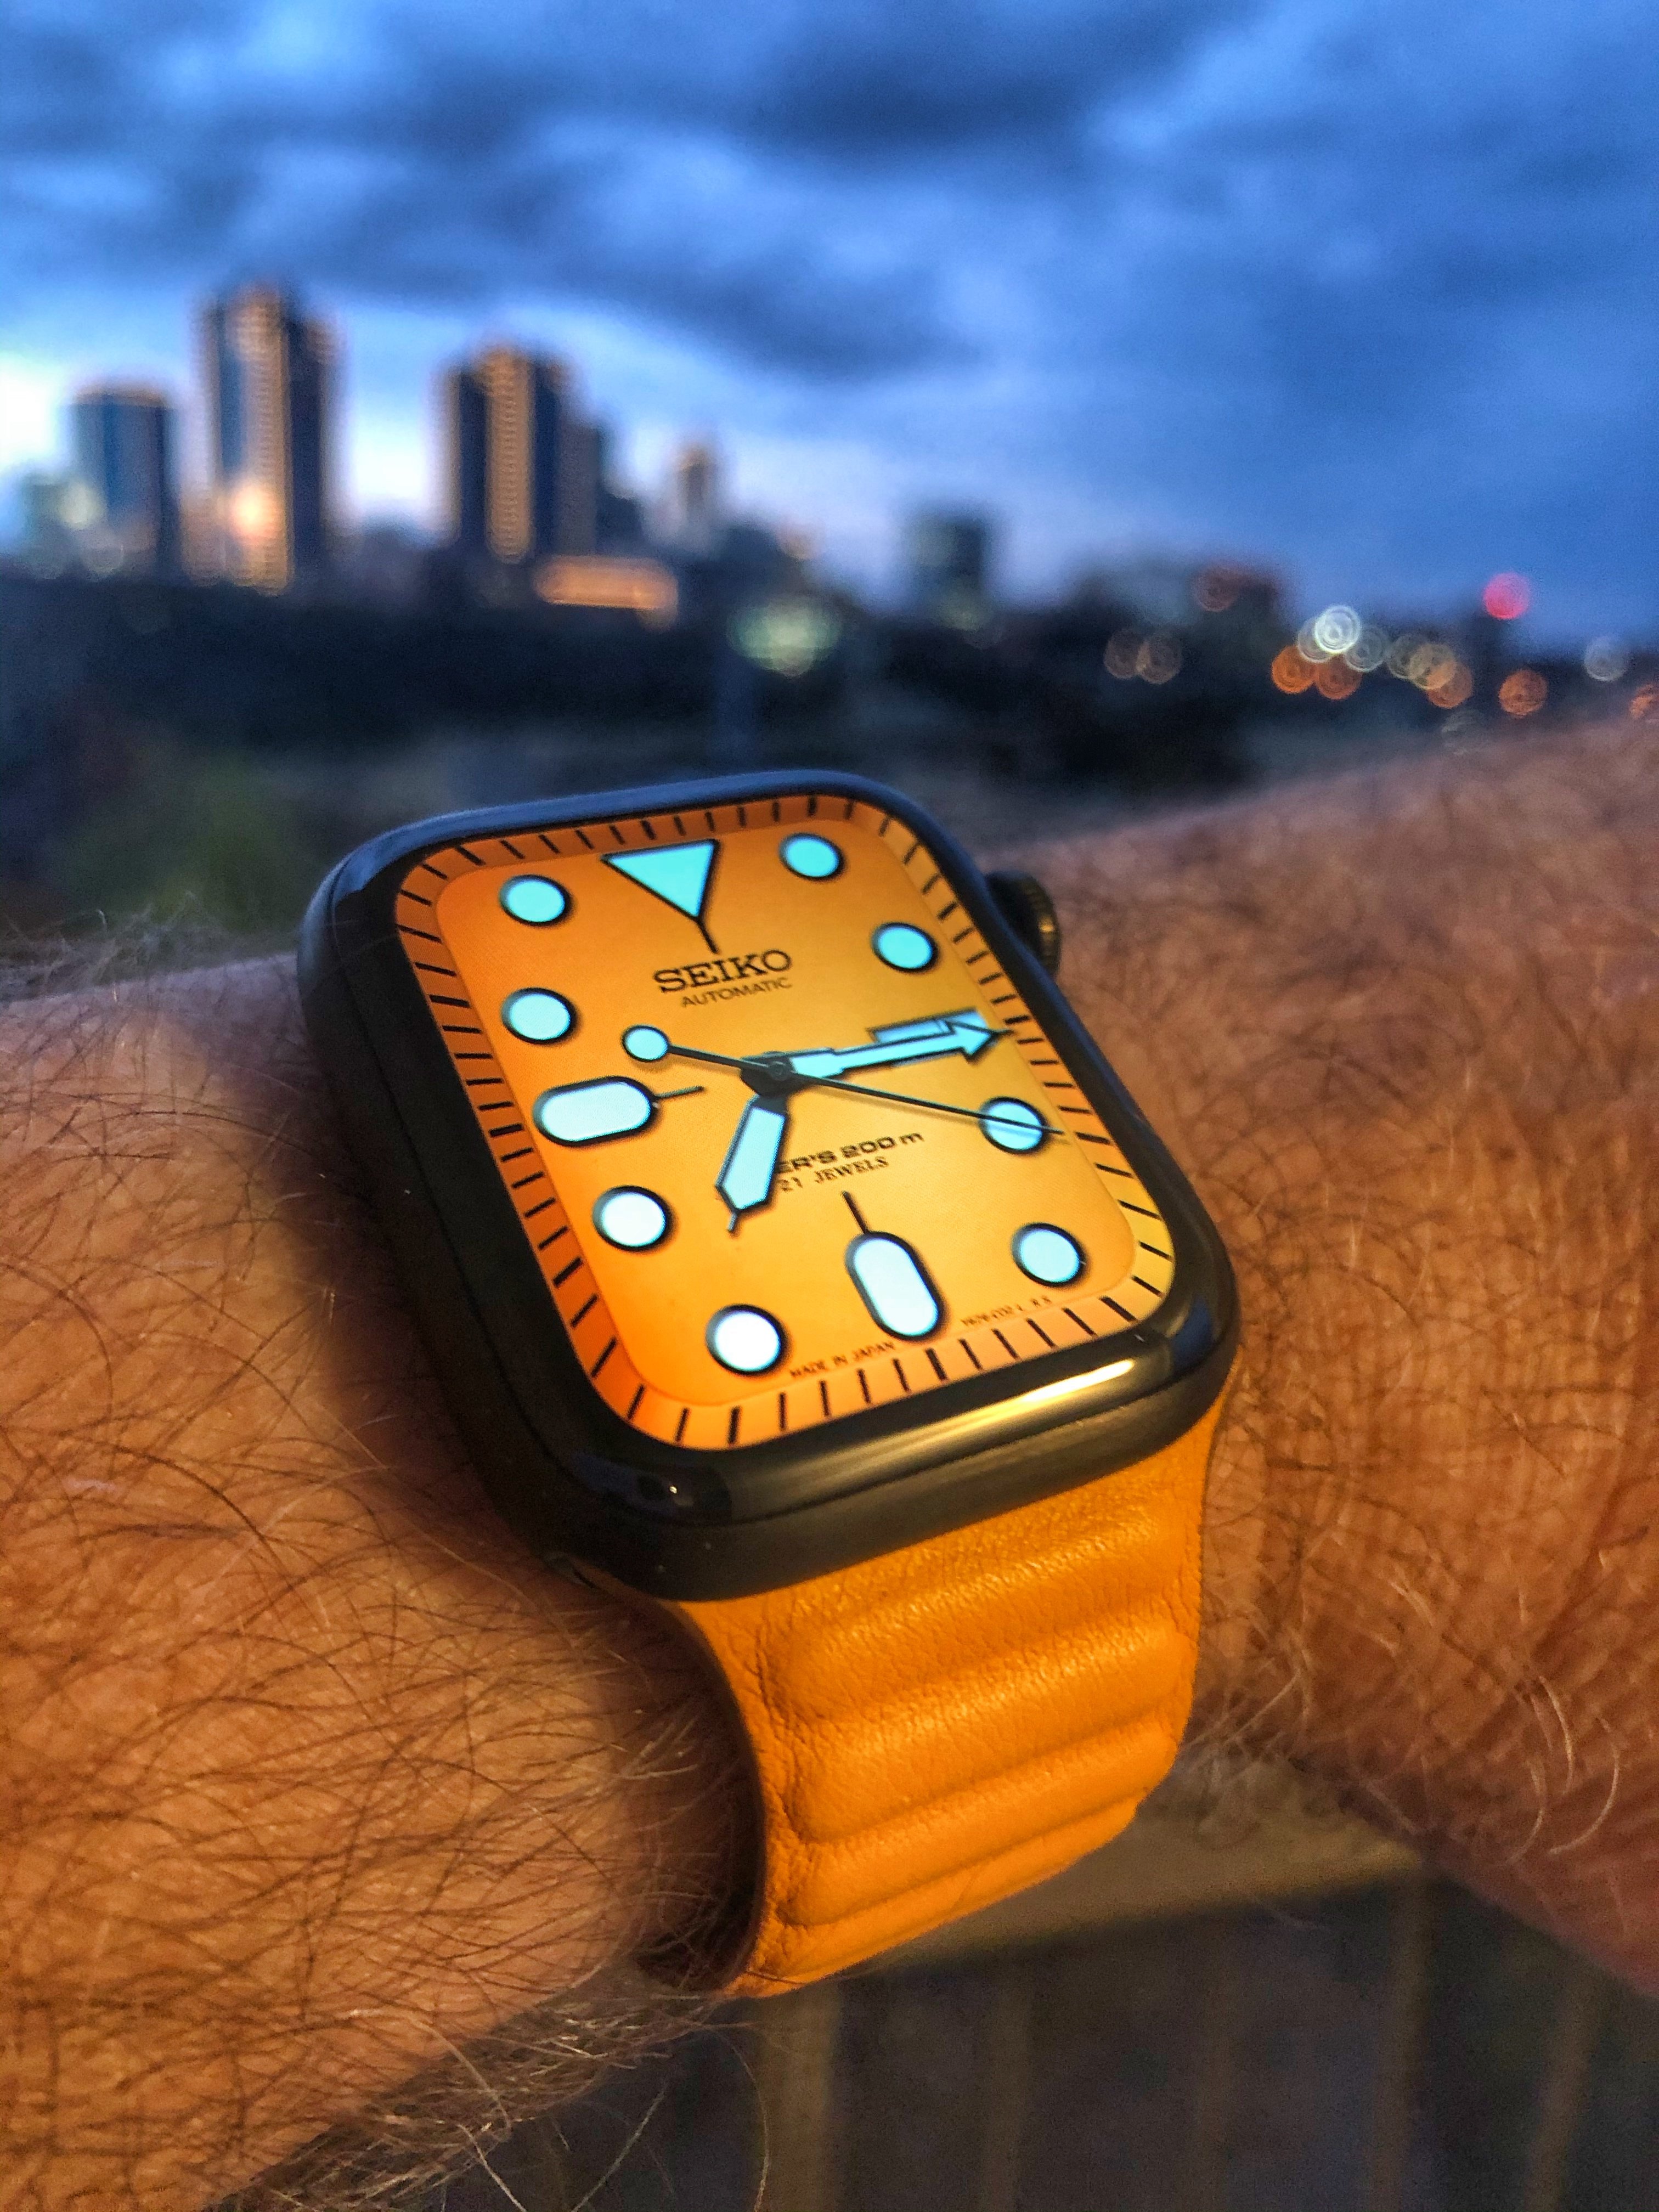 Show off your Apple Watch | Page 583 | MacRumors Forums